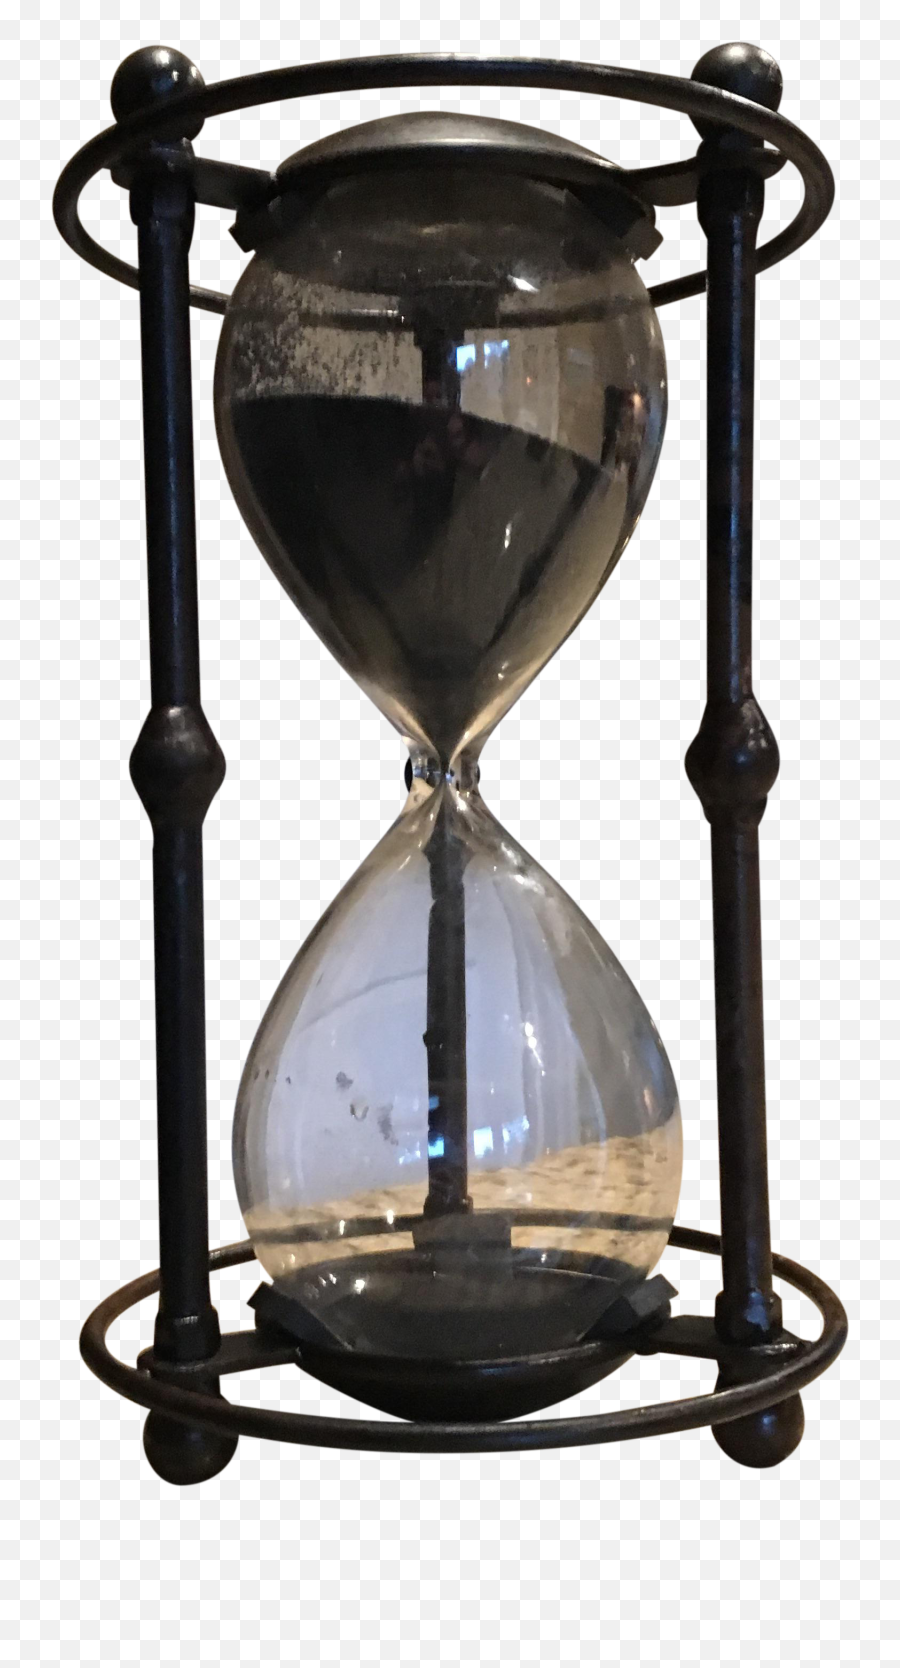 Antique Hourglass Png Picture - Hourglass With Black Sand,Hourglass Transparent Background